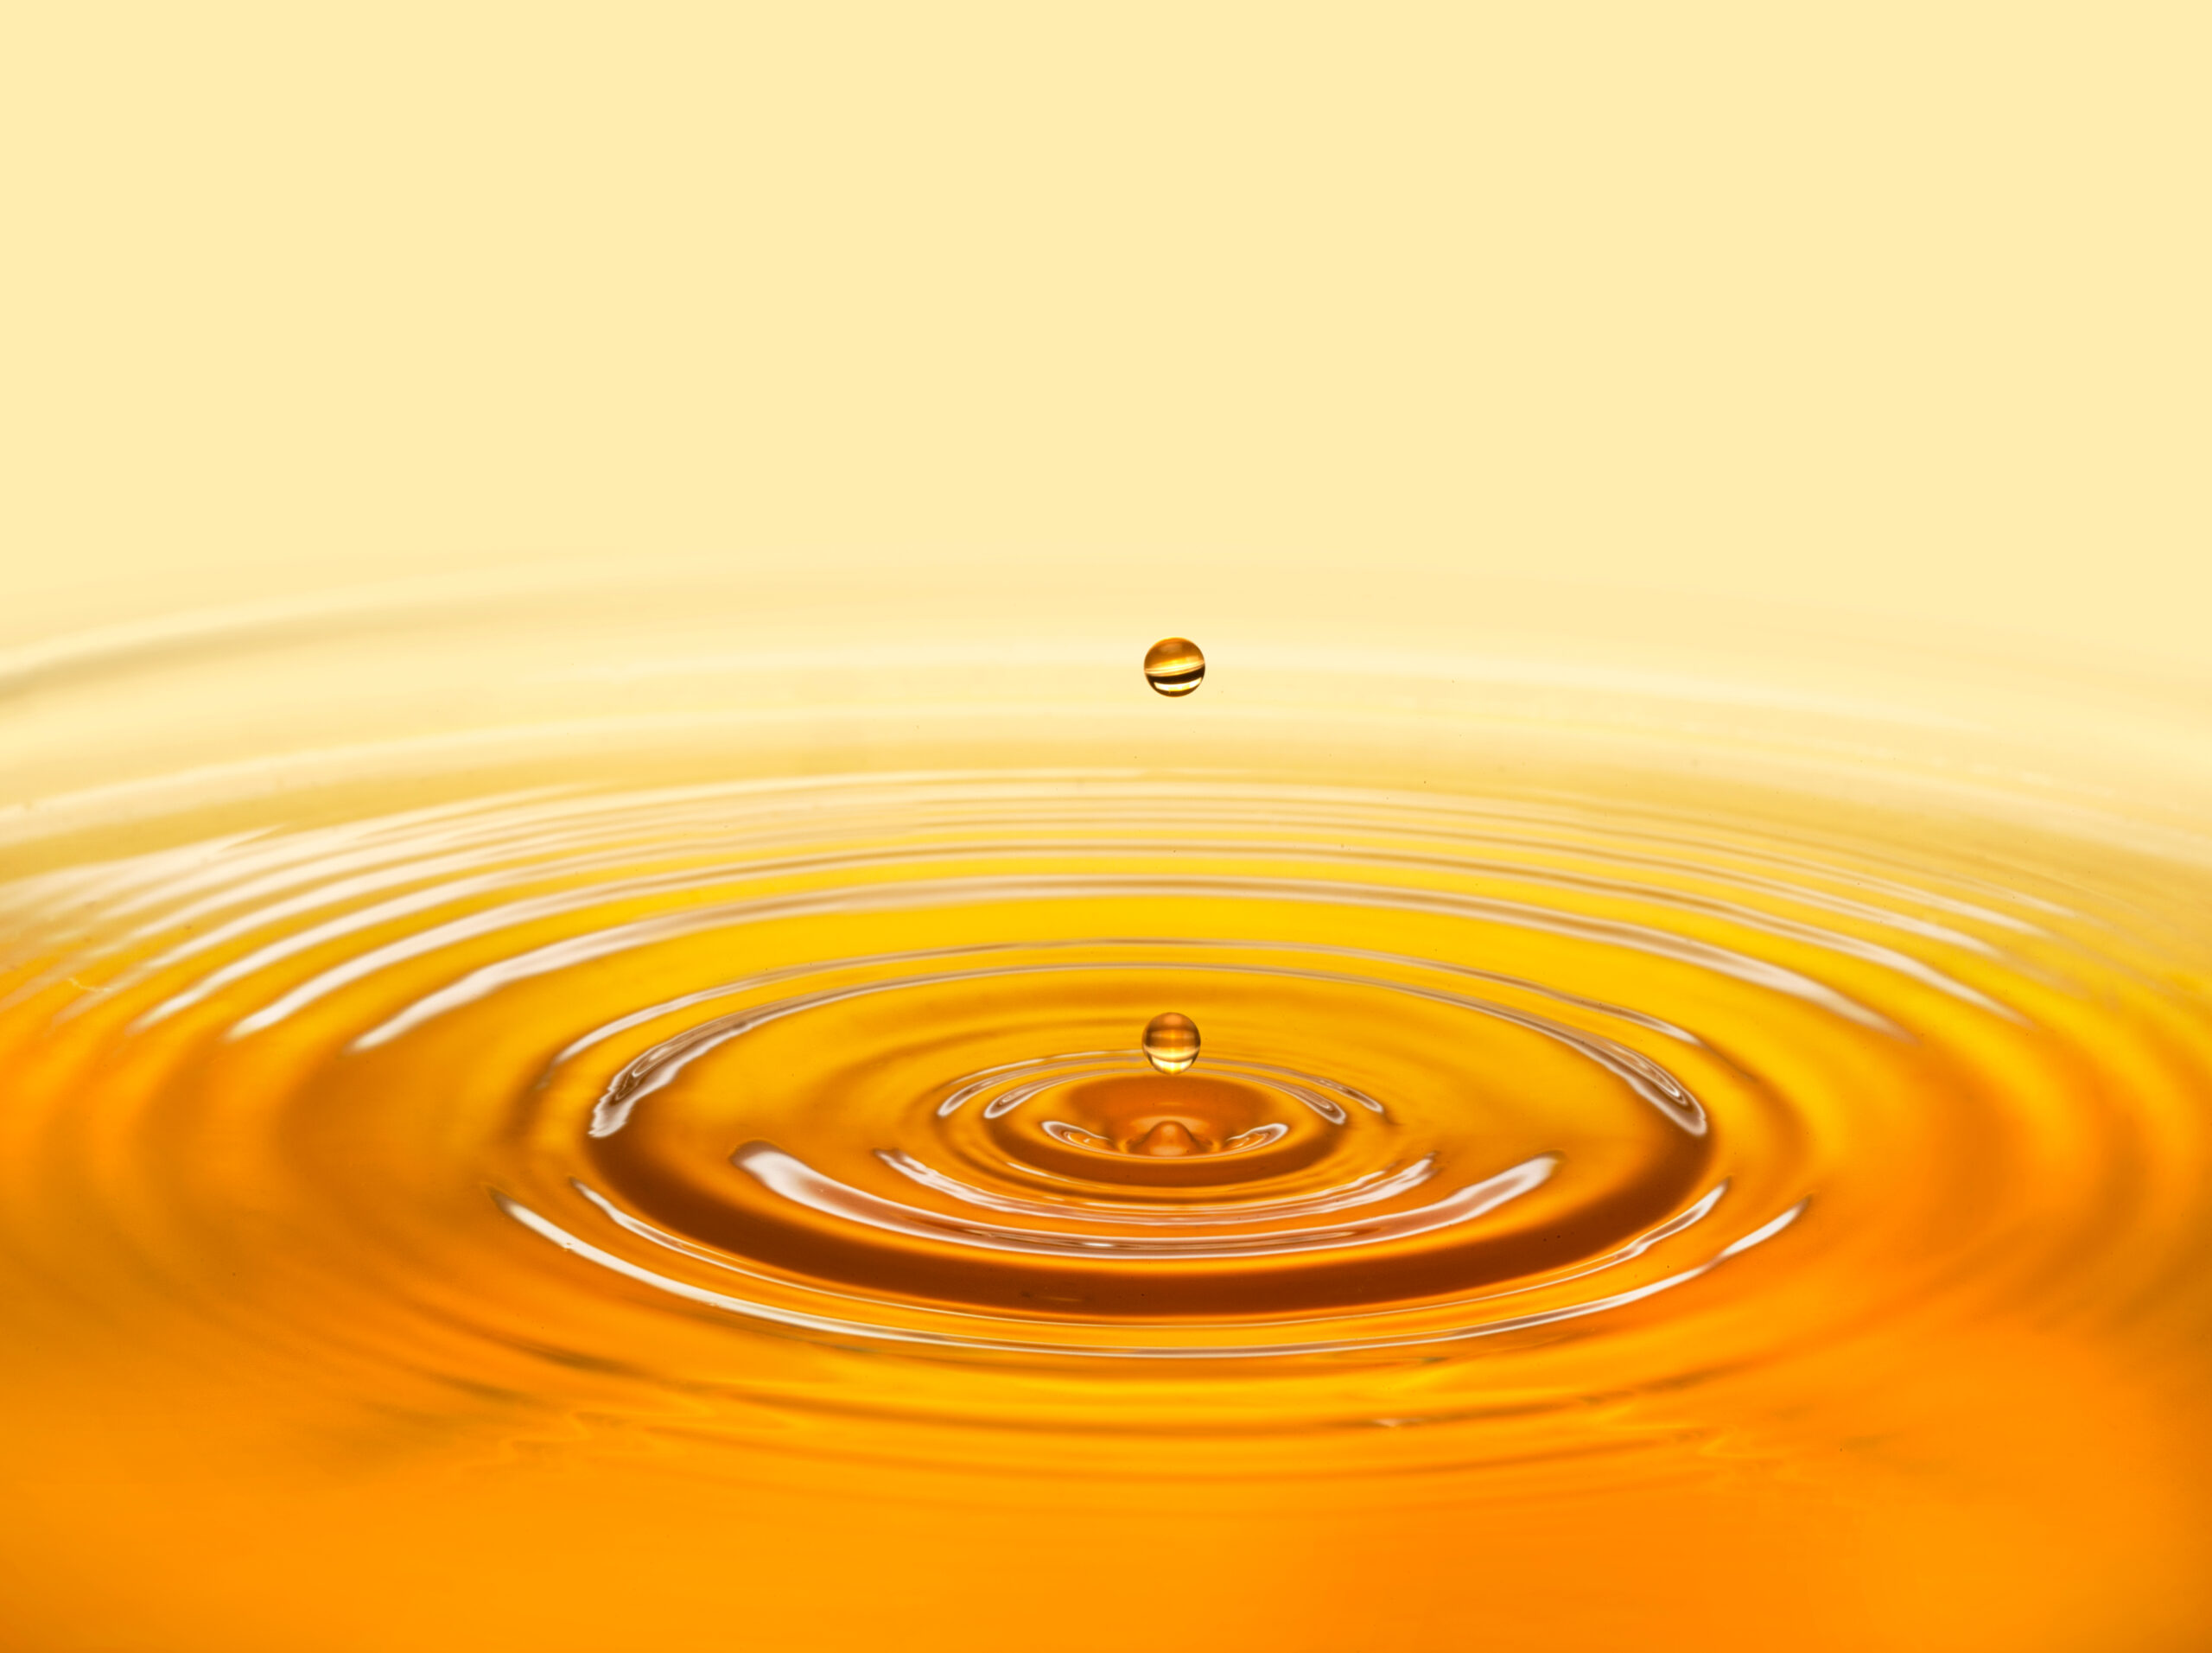 Golden,Oil,Drop,With,Ripples,Vegetable,,Organic,,Olive,,Sunflower,Oil,